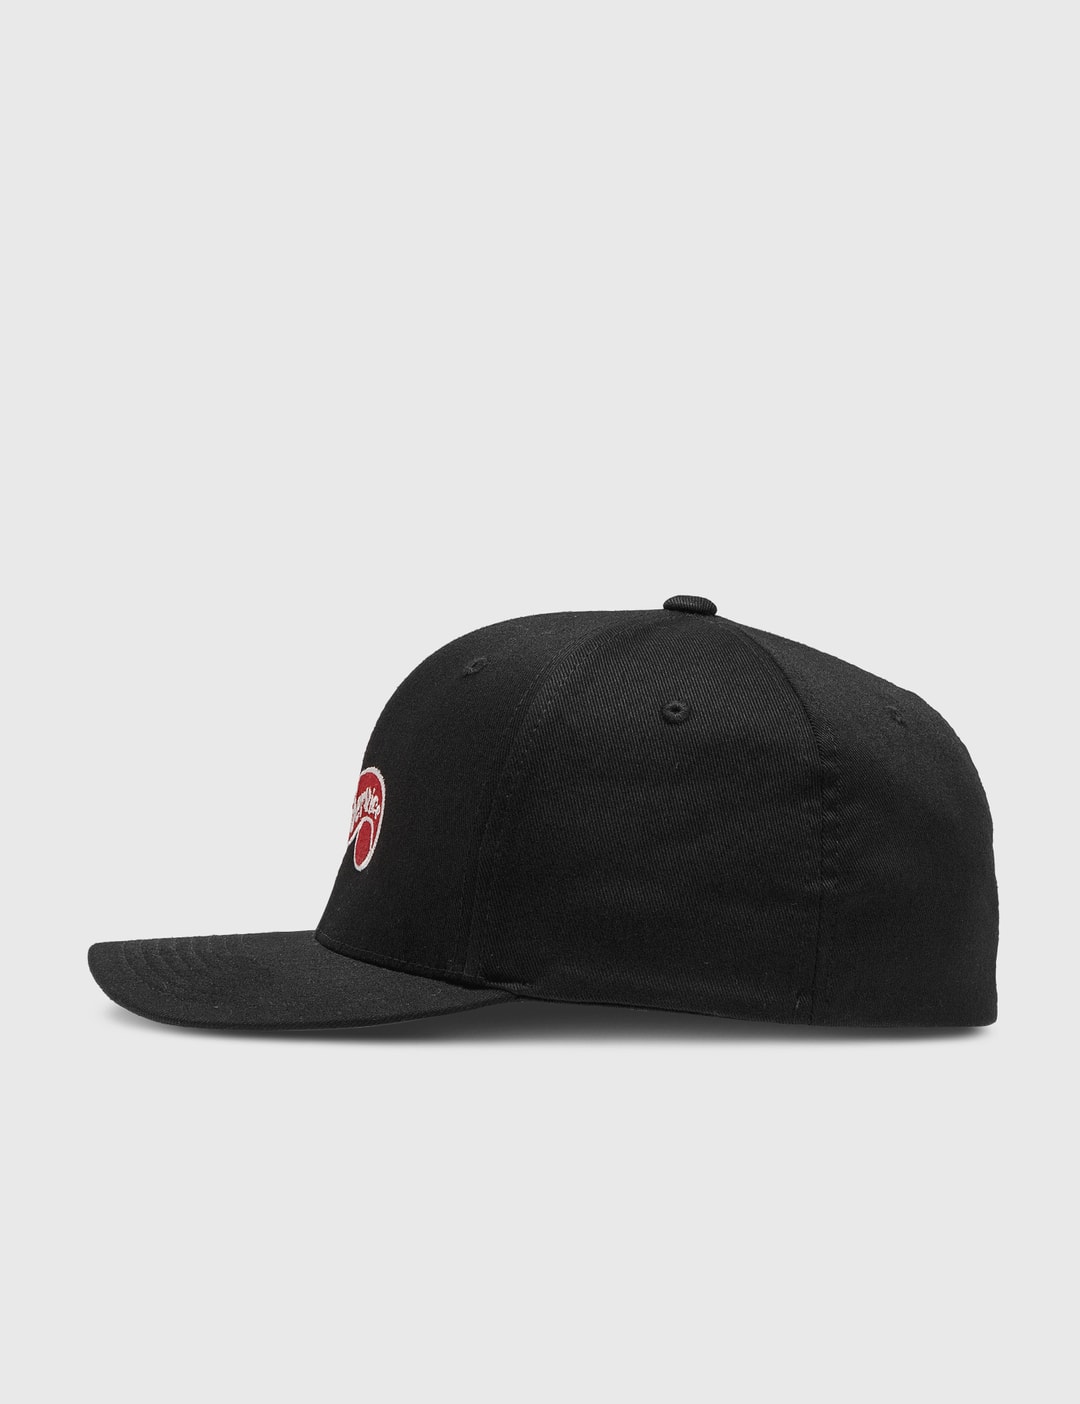 CarService - CarService Logo Cap | HBX - Globally Curated Fashion and ...